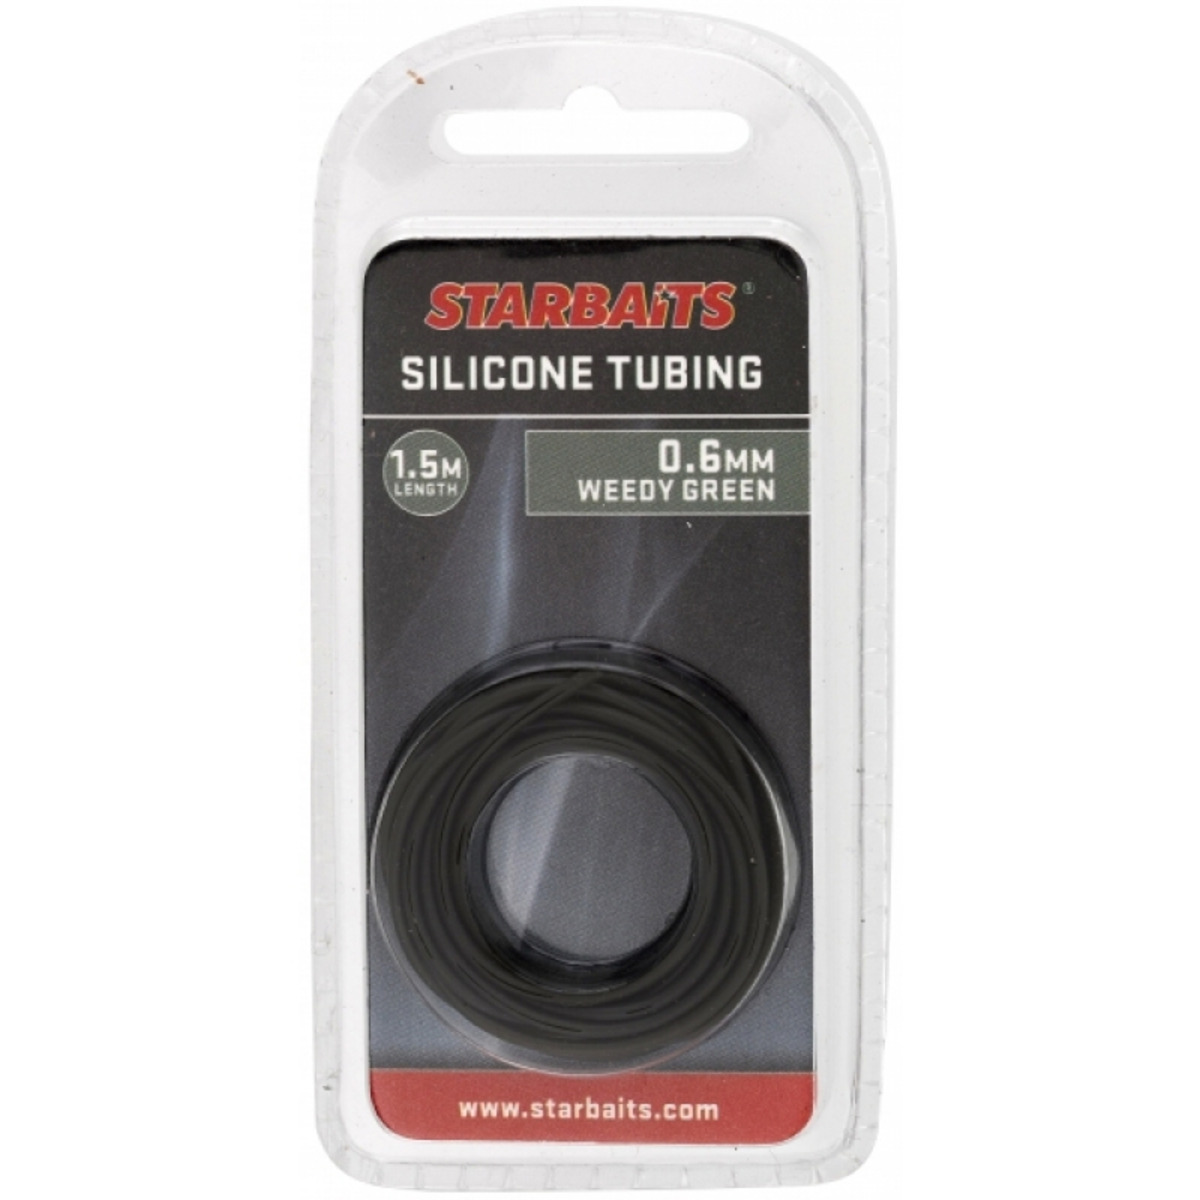 Starbaits Silicona Tubing 0.6mm - WEEDY GREEN